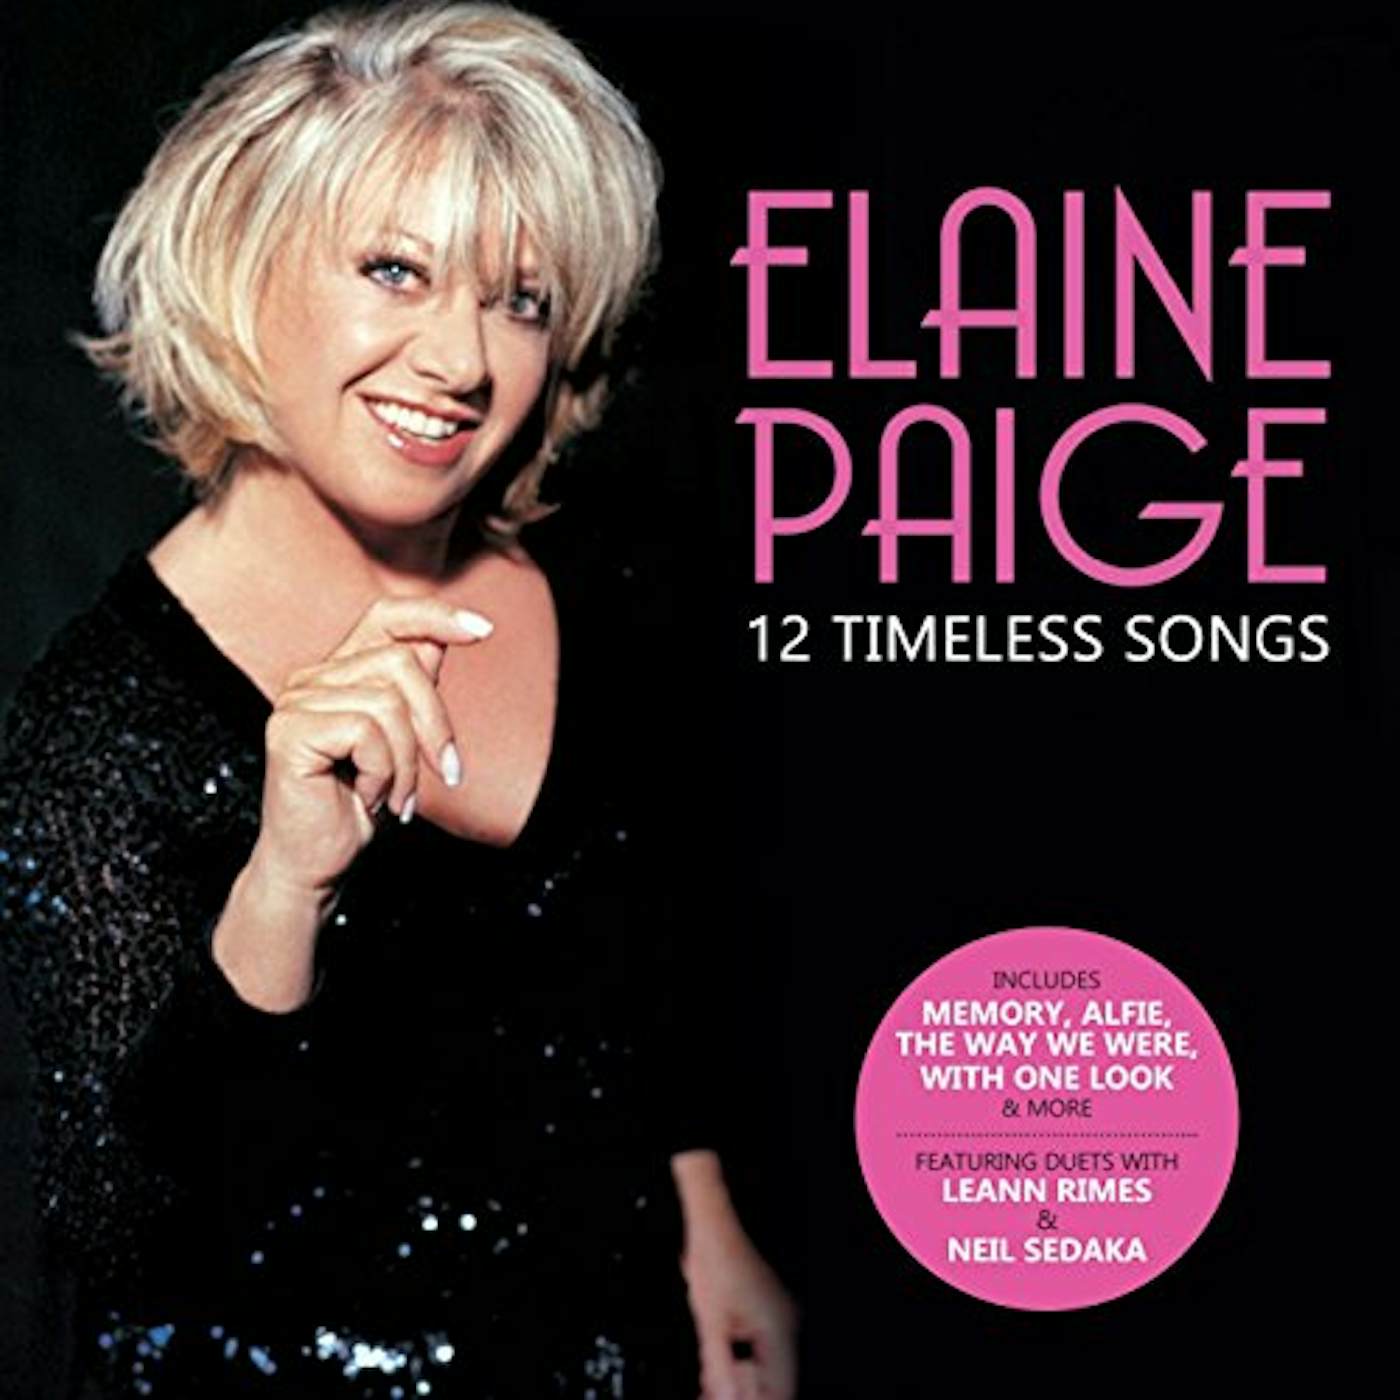 Elaine Paige 12 TIMELESS SONGS CD